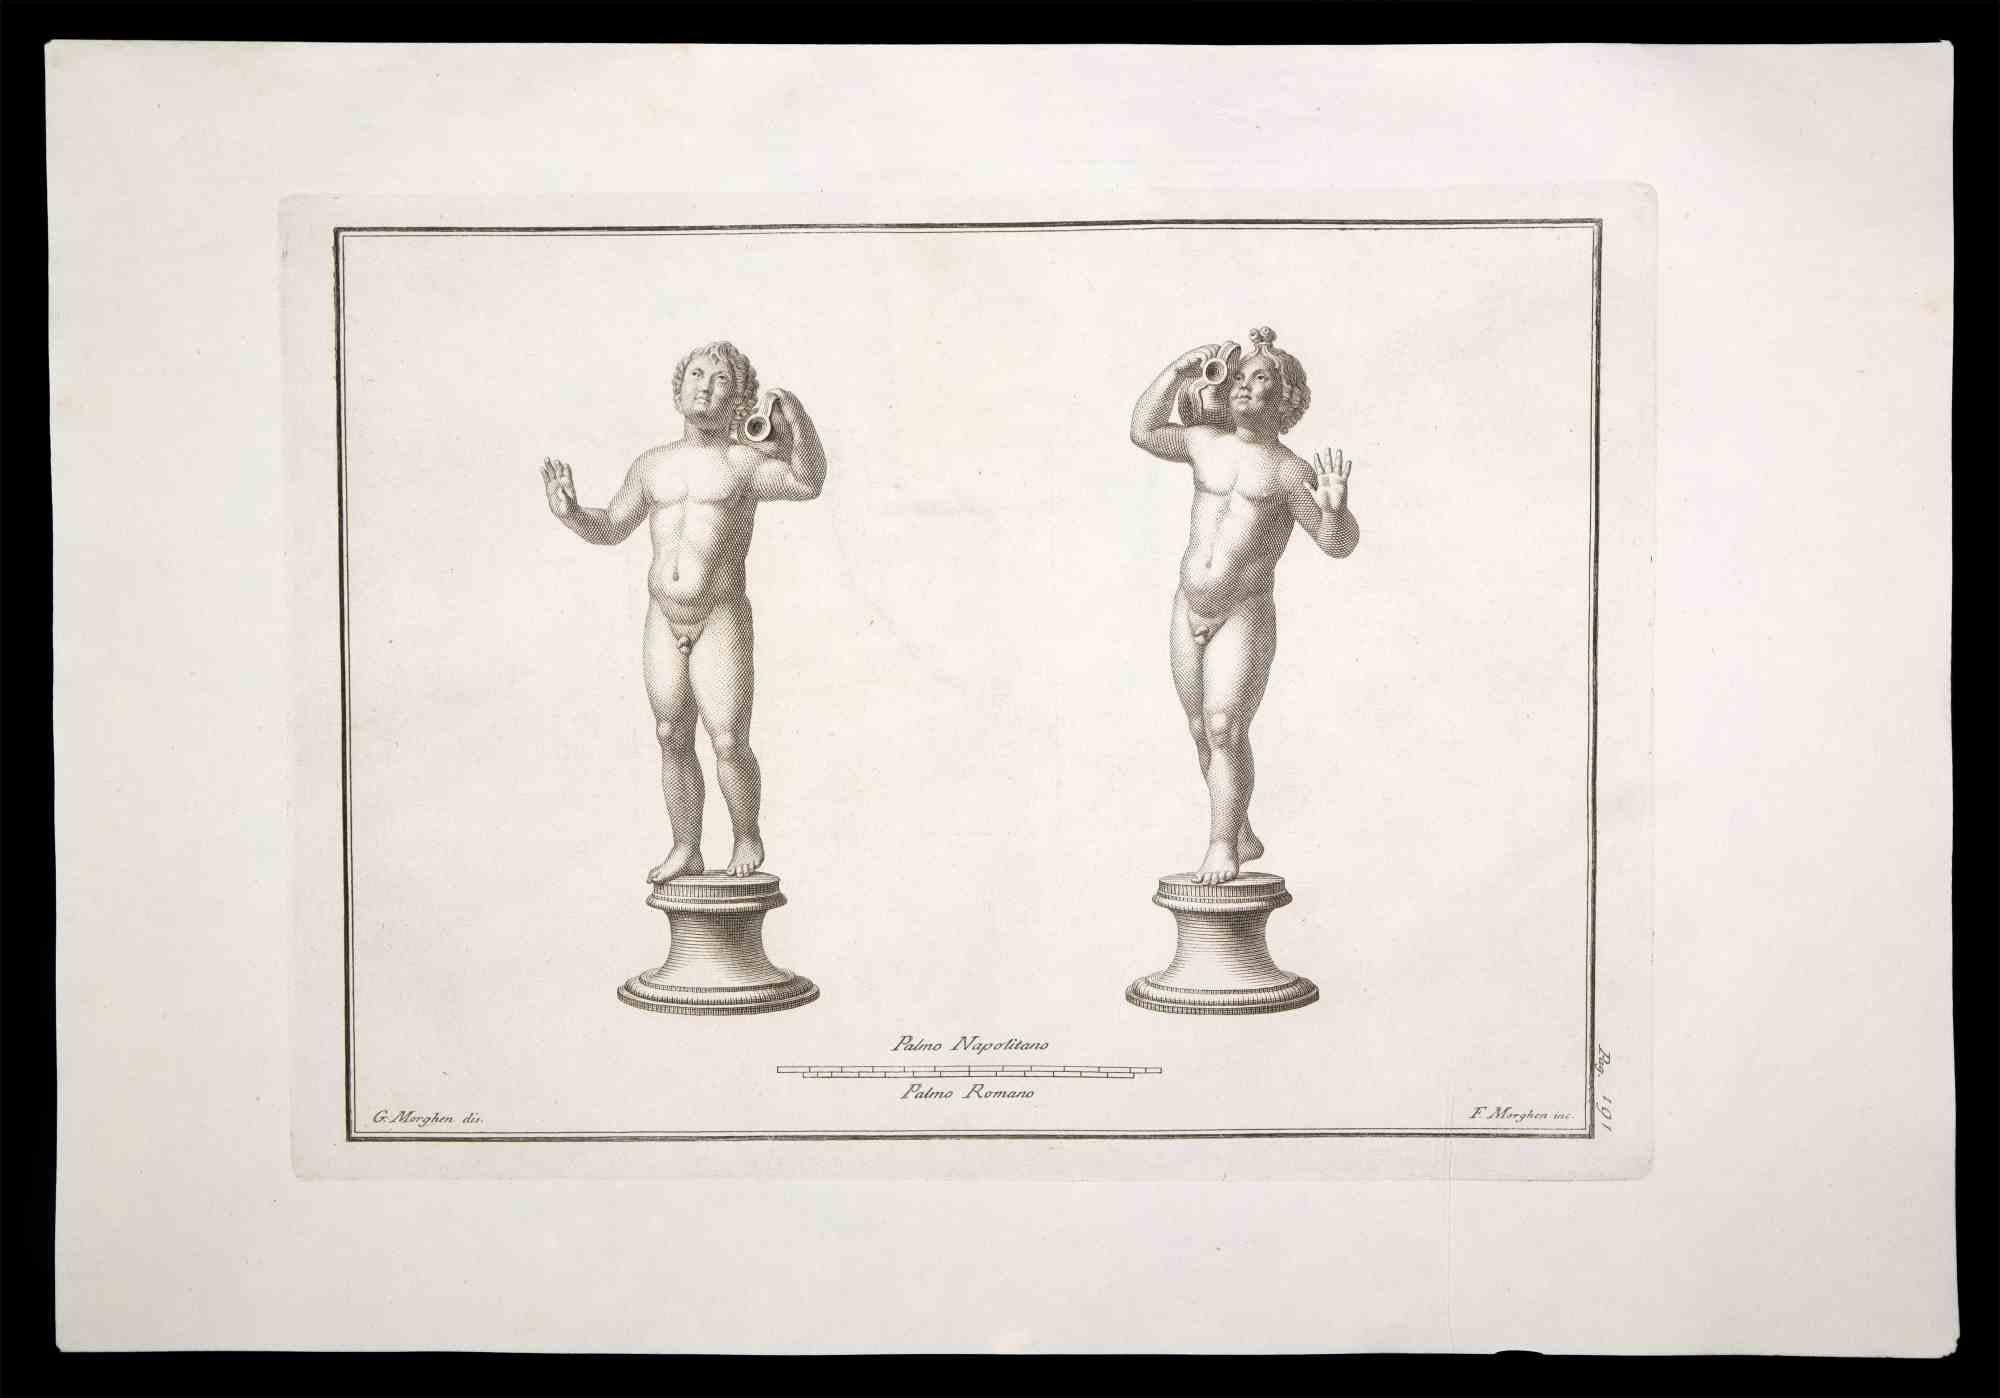 Ancient Roman Statues, from the series "Antiquities of Herculaneum", is an original etching on paper realized by F. Morghen in the 18th Century.

Signed on the plate, on the lower right.

Good conditions with slight folding. 

The etching belongs to